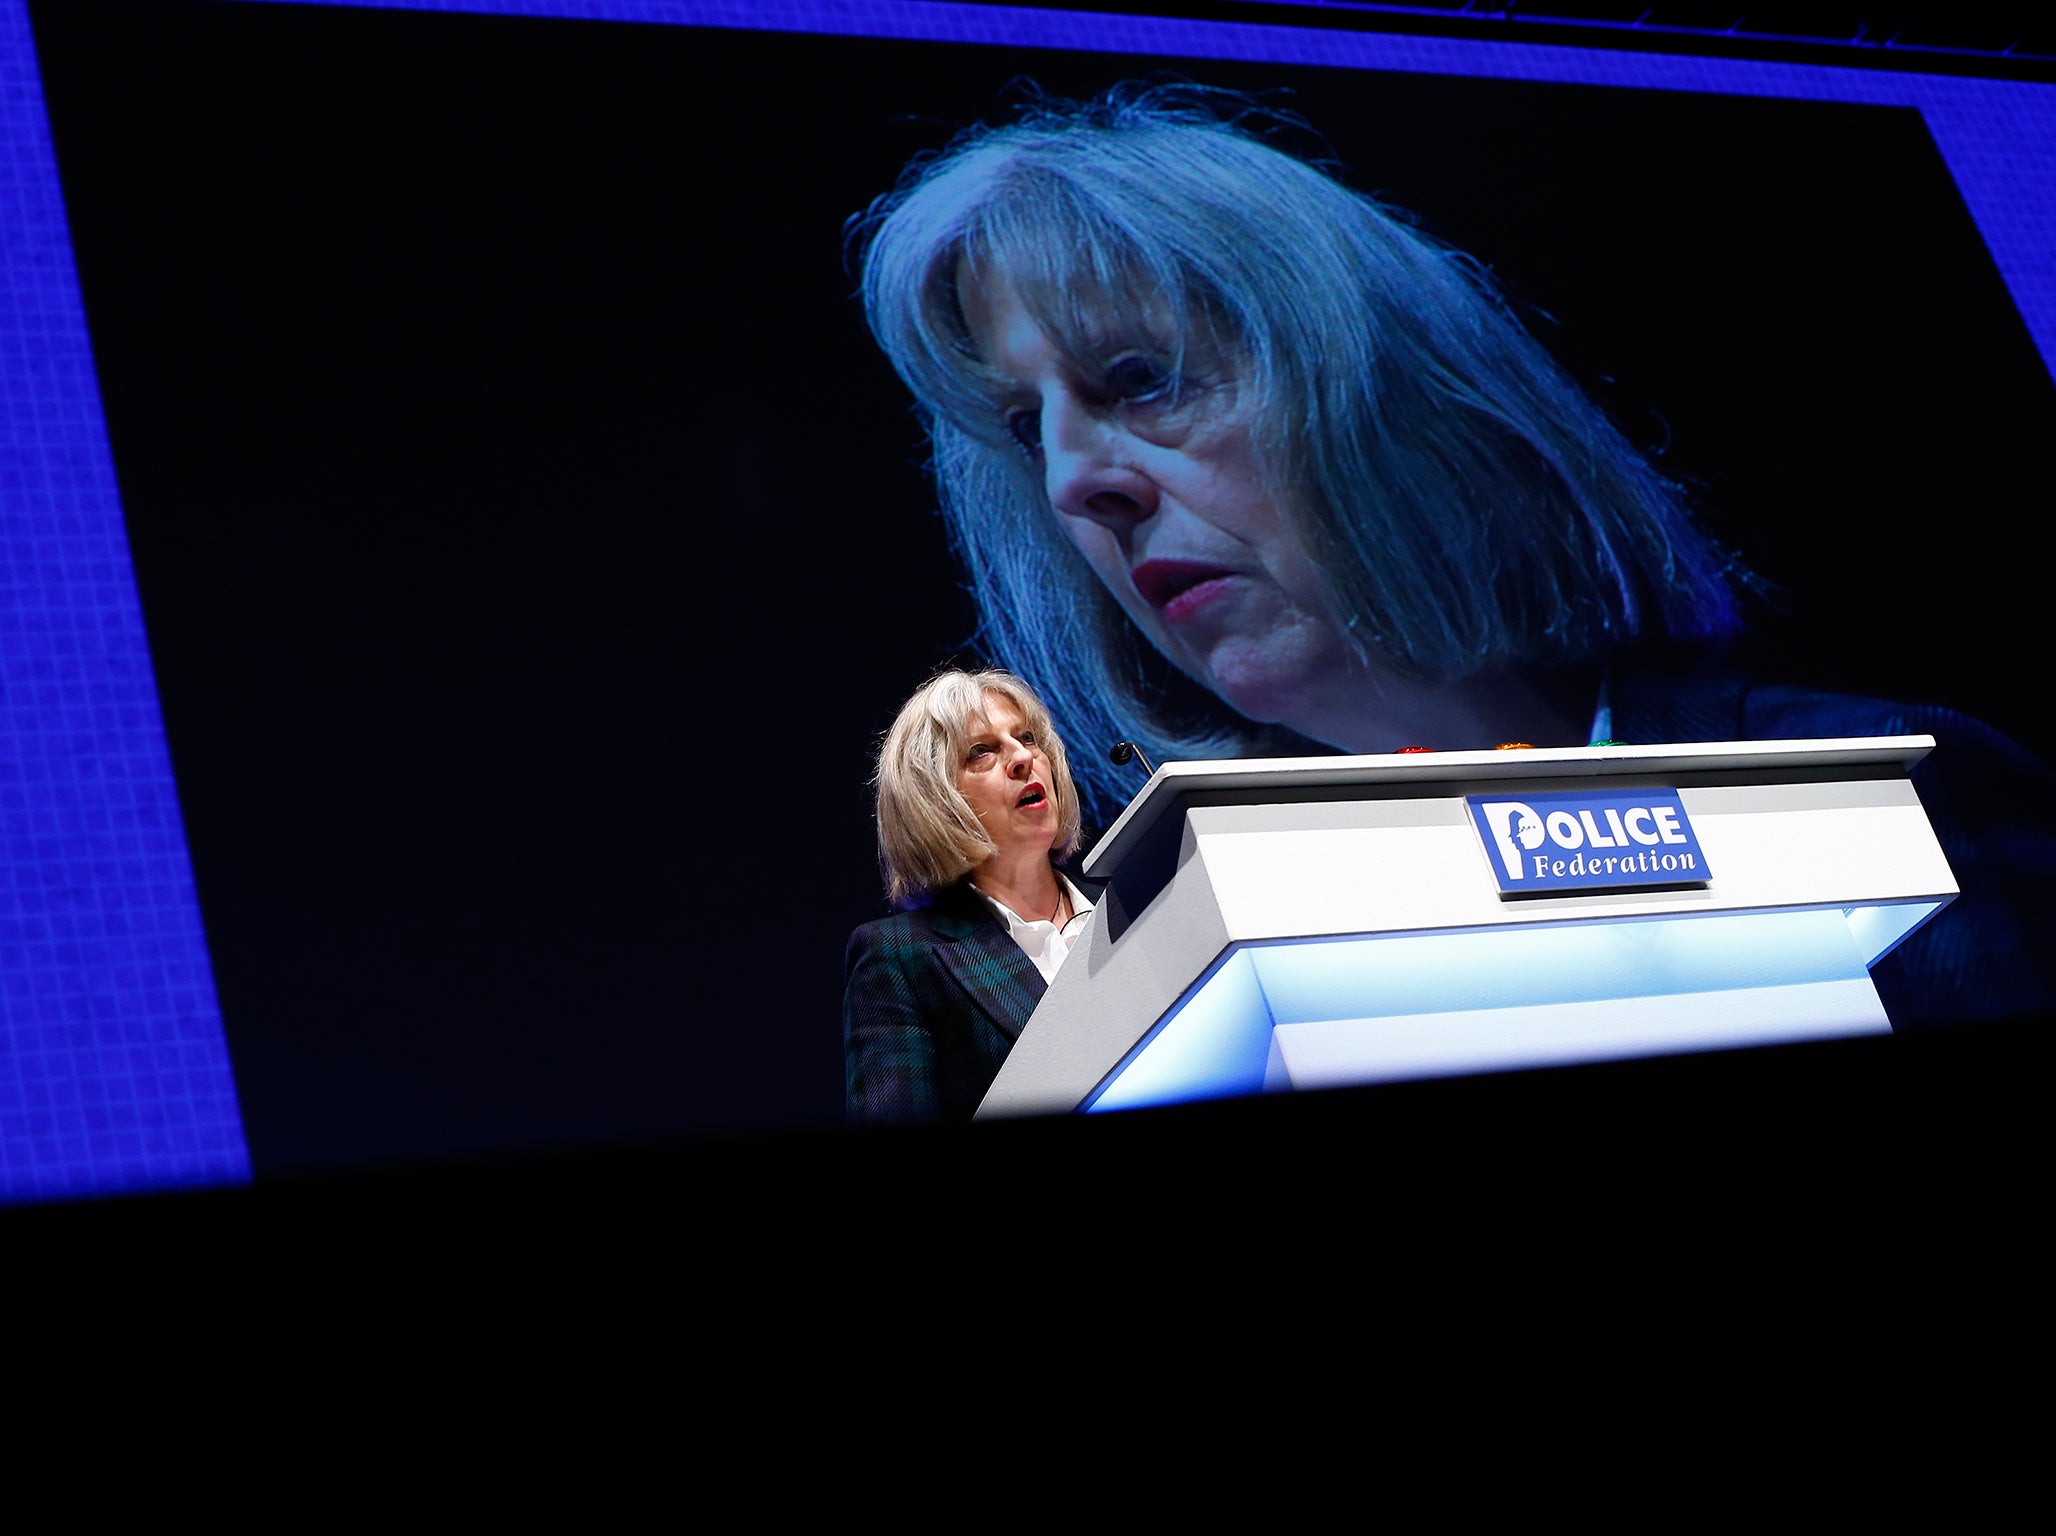 Britain's Home Secretary Theresa May addresses the Police Federation's conference in Bournemouth, southern England May 21, 2014